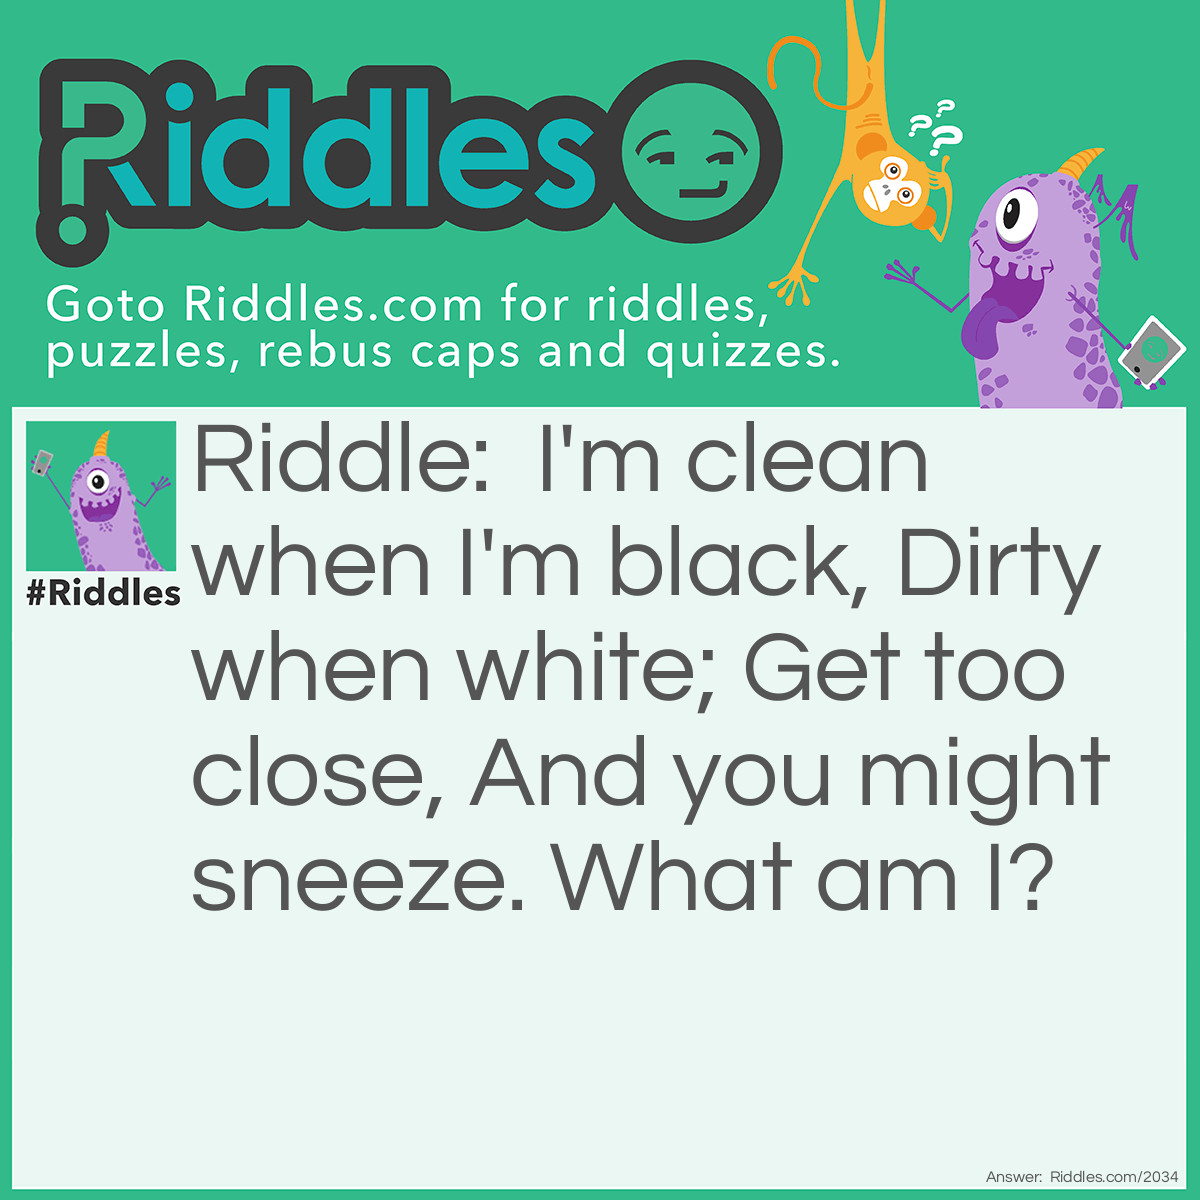 Riddle: I'm clean when I'm black,
Dirty when white;
Get too close,
And you might sneeze.
What am I? Answer: A Chalkboard.